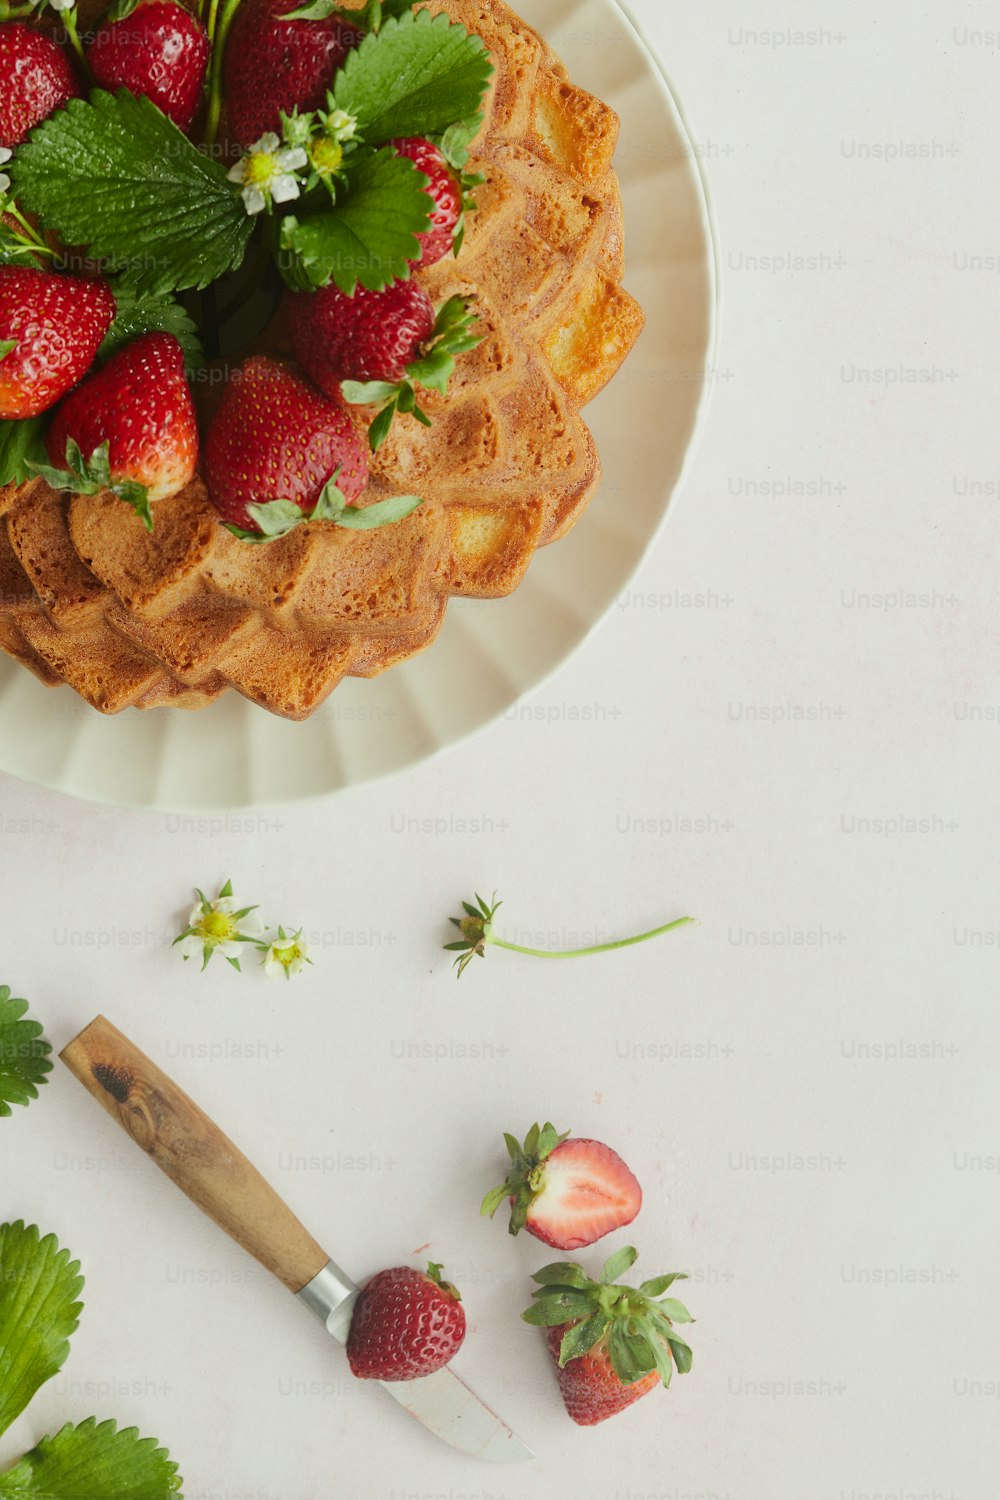 a plate of waffles with strawberries on top